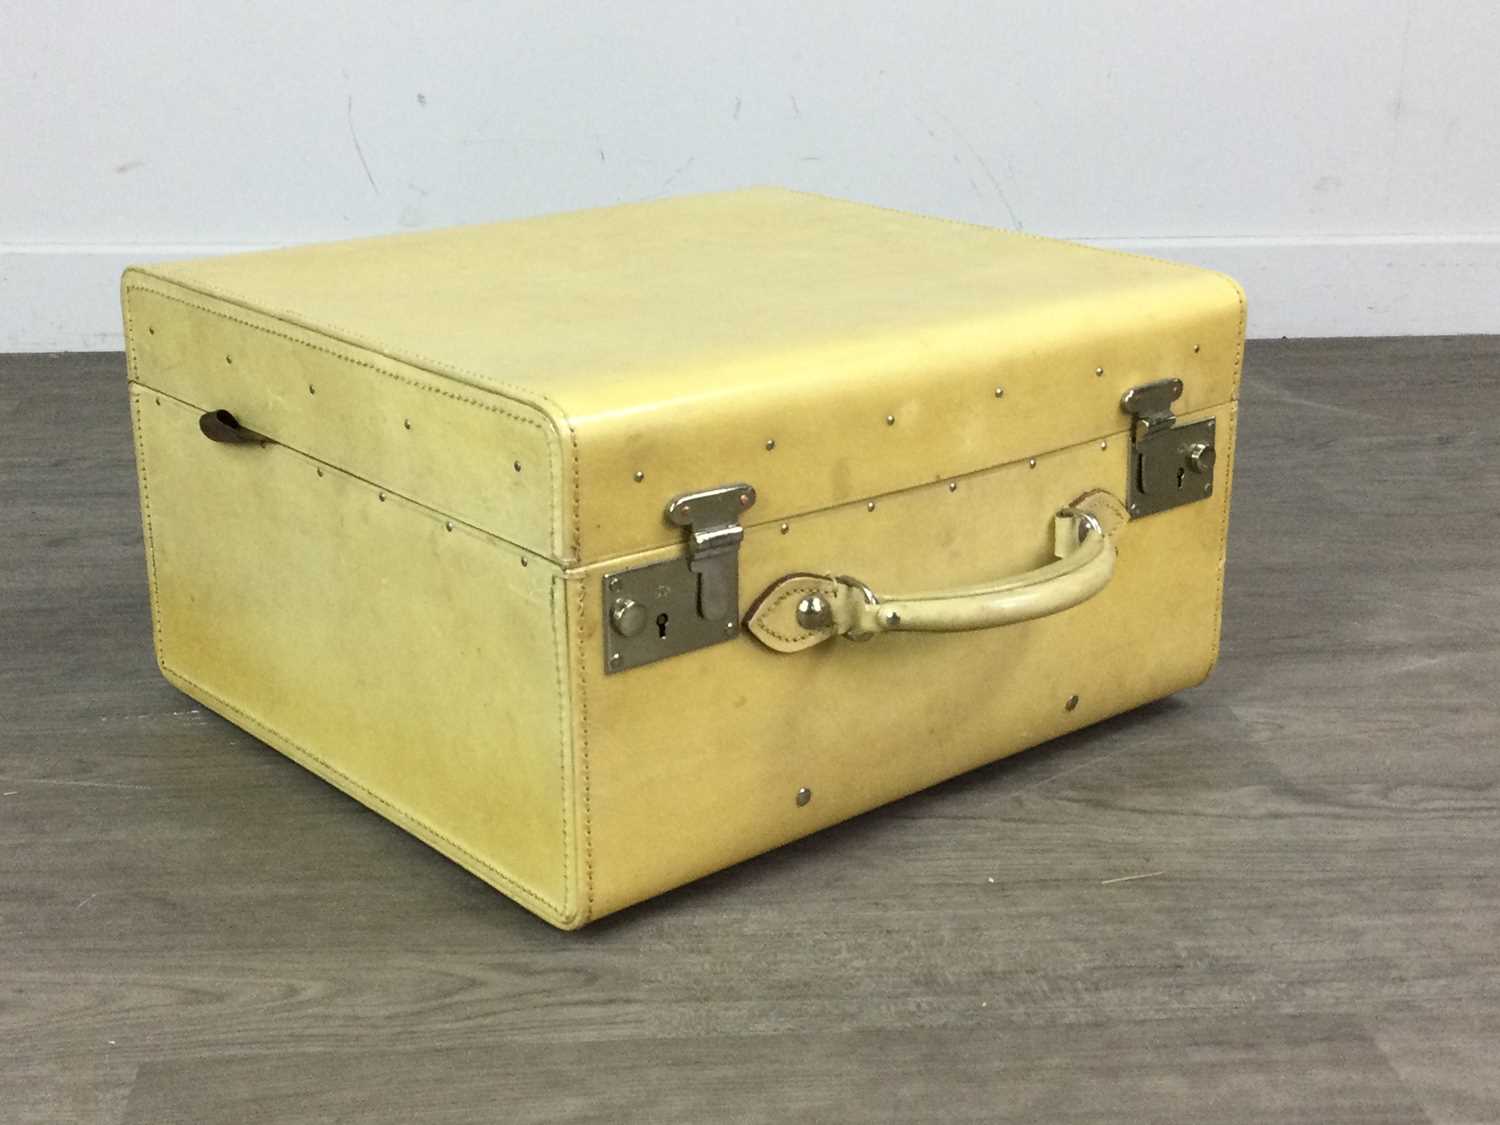 A VINTAGE VICTOR LUGGAGE HATBOX ALONG WITH TWO SUITCASES AND A TRAVEL CASE - Image 3 of 3